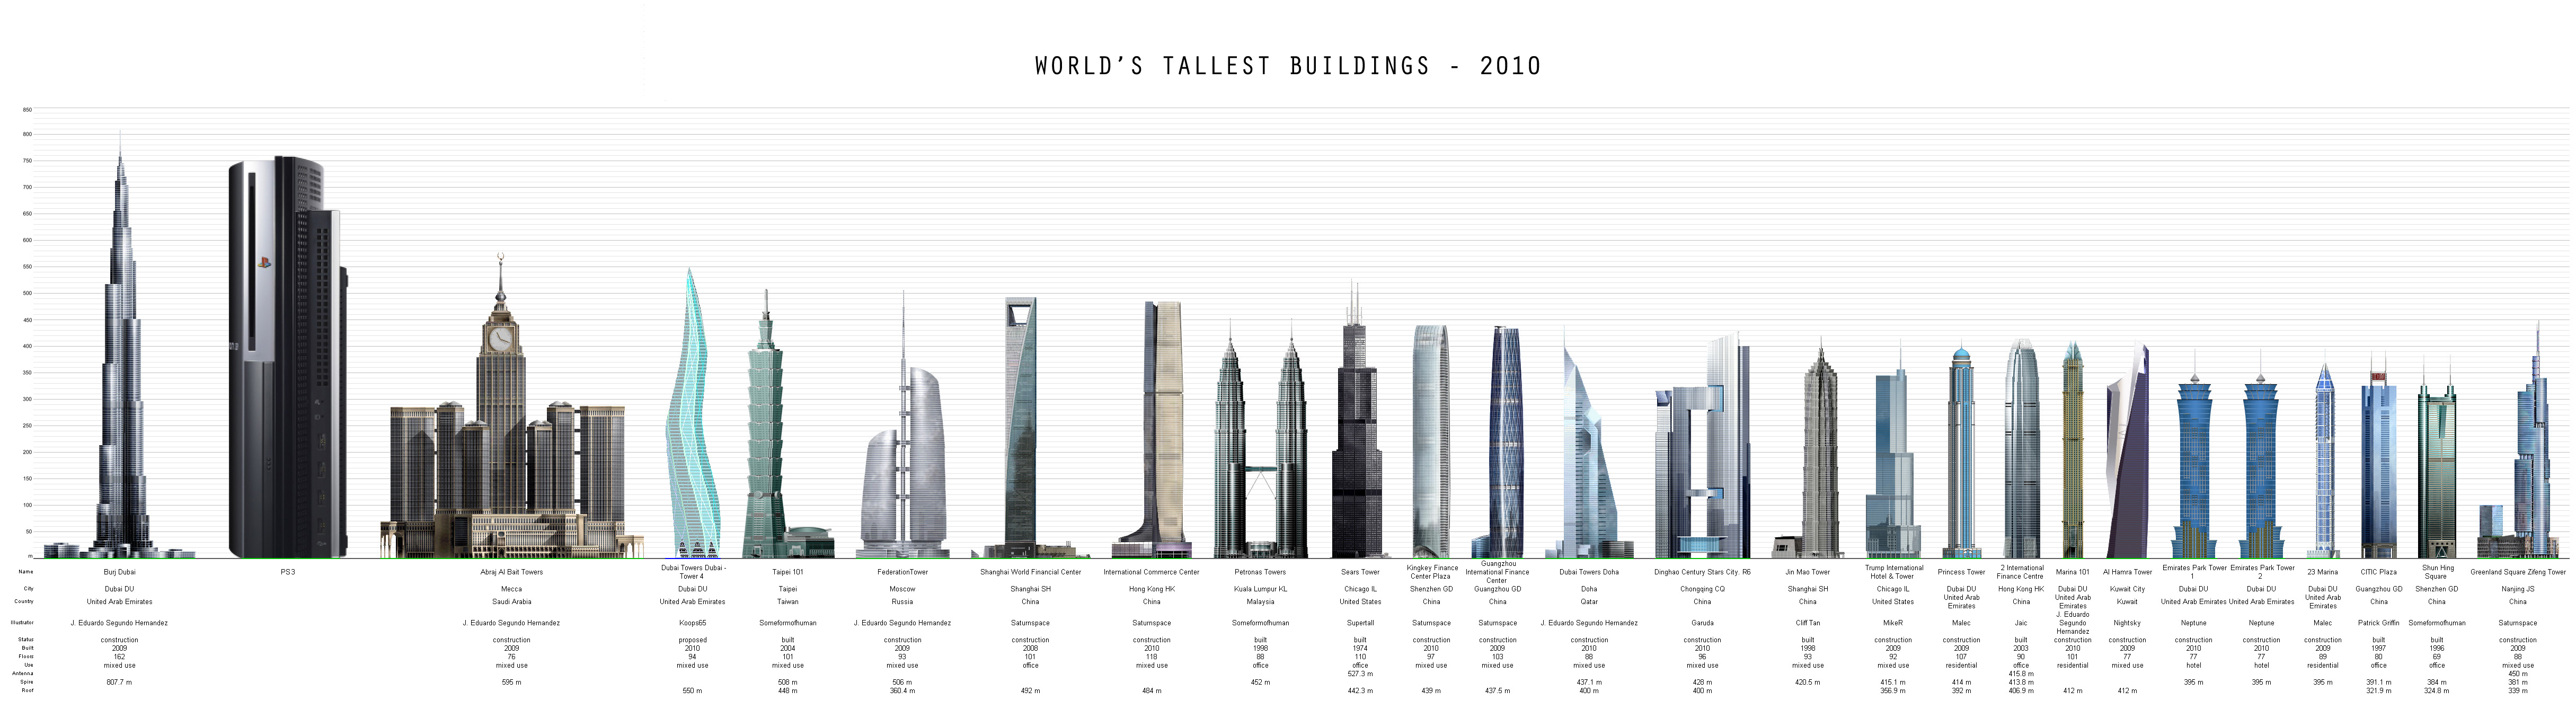 Worlds tallest building in year 2010